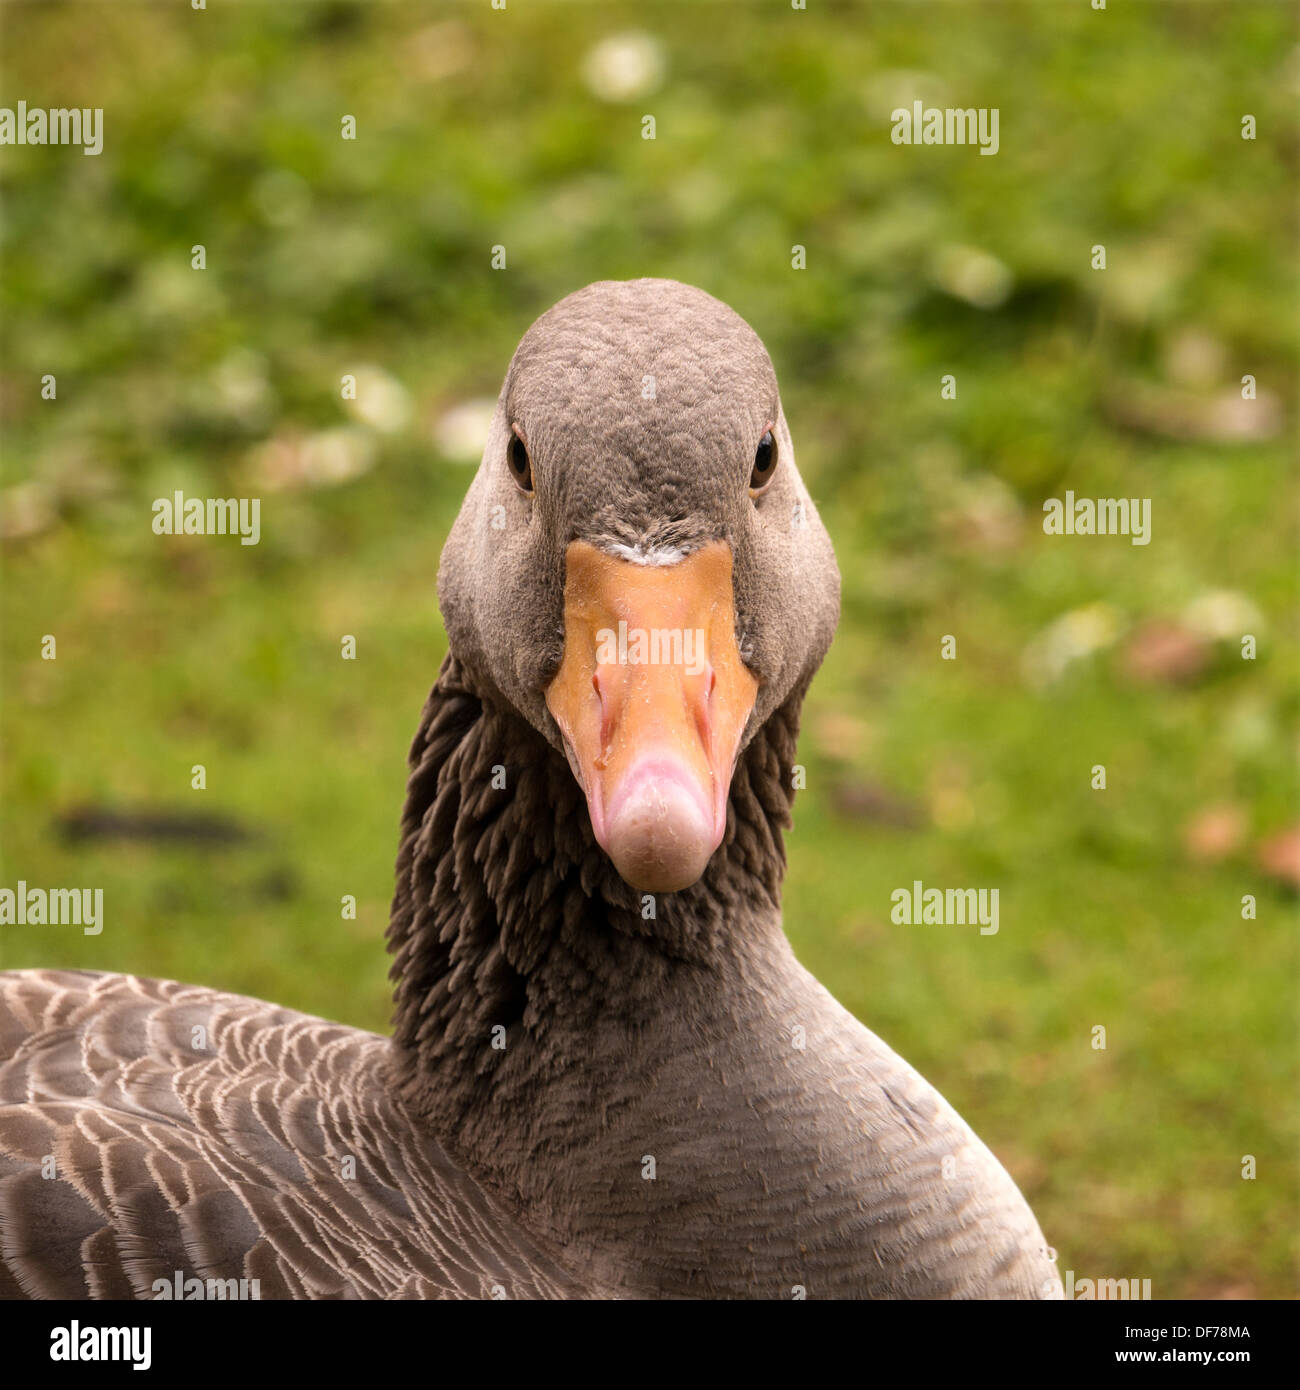 Closeup of Greylag goose ( Anser Anser ) showing front of head, bill and eyes set for forward vision. Stock Photo